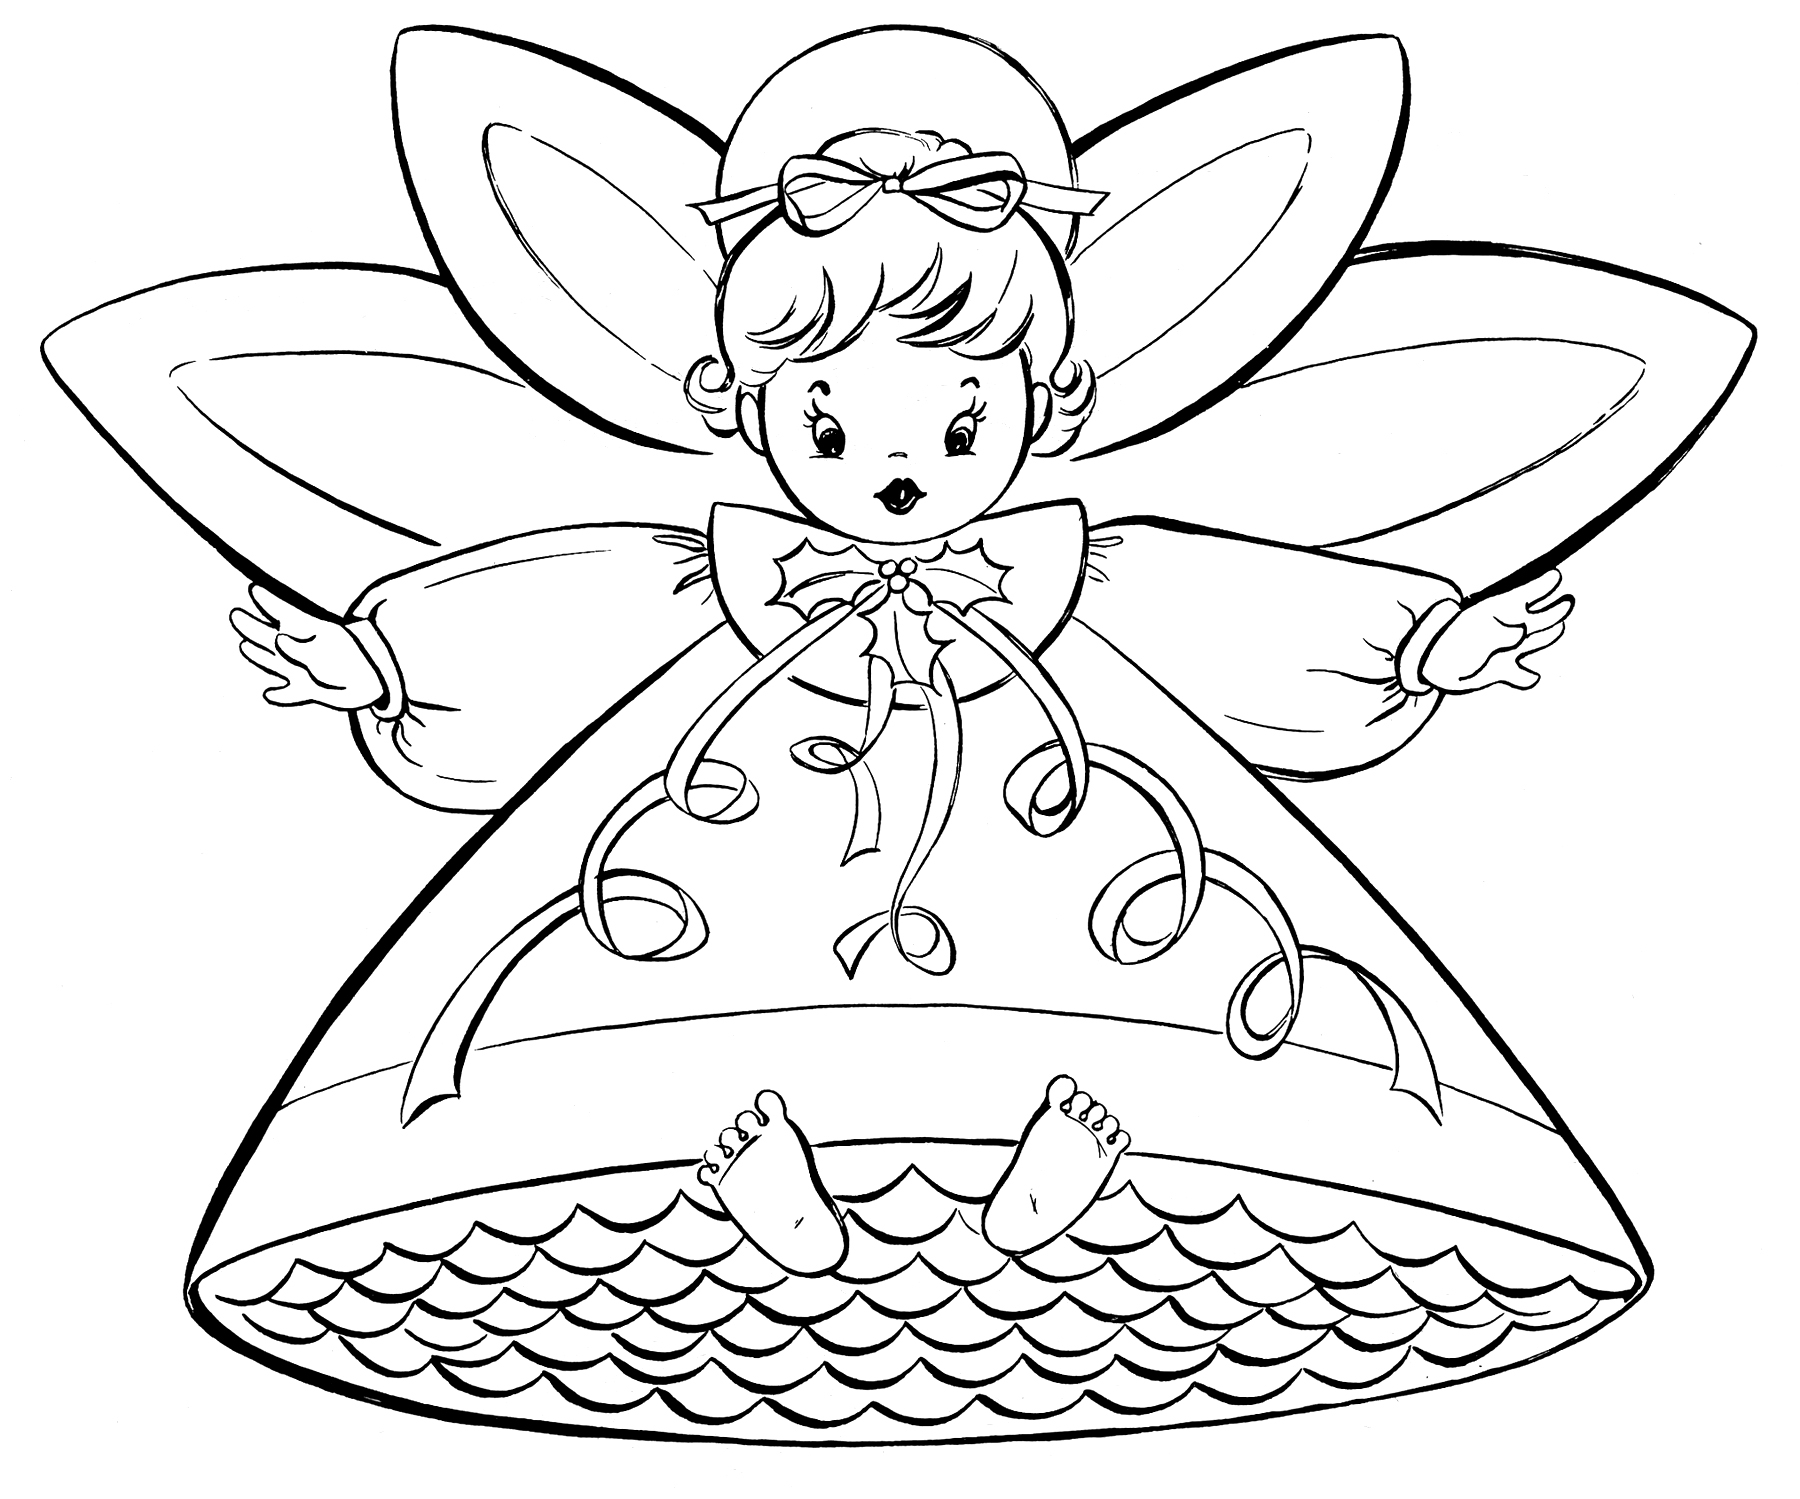 20-free-christmas-coloring-pages-the-graphics-fairy